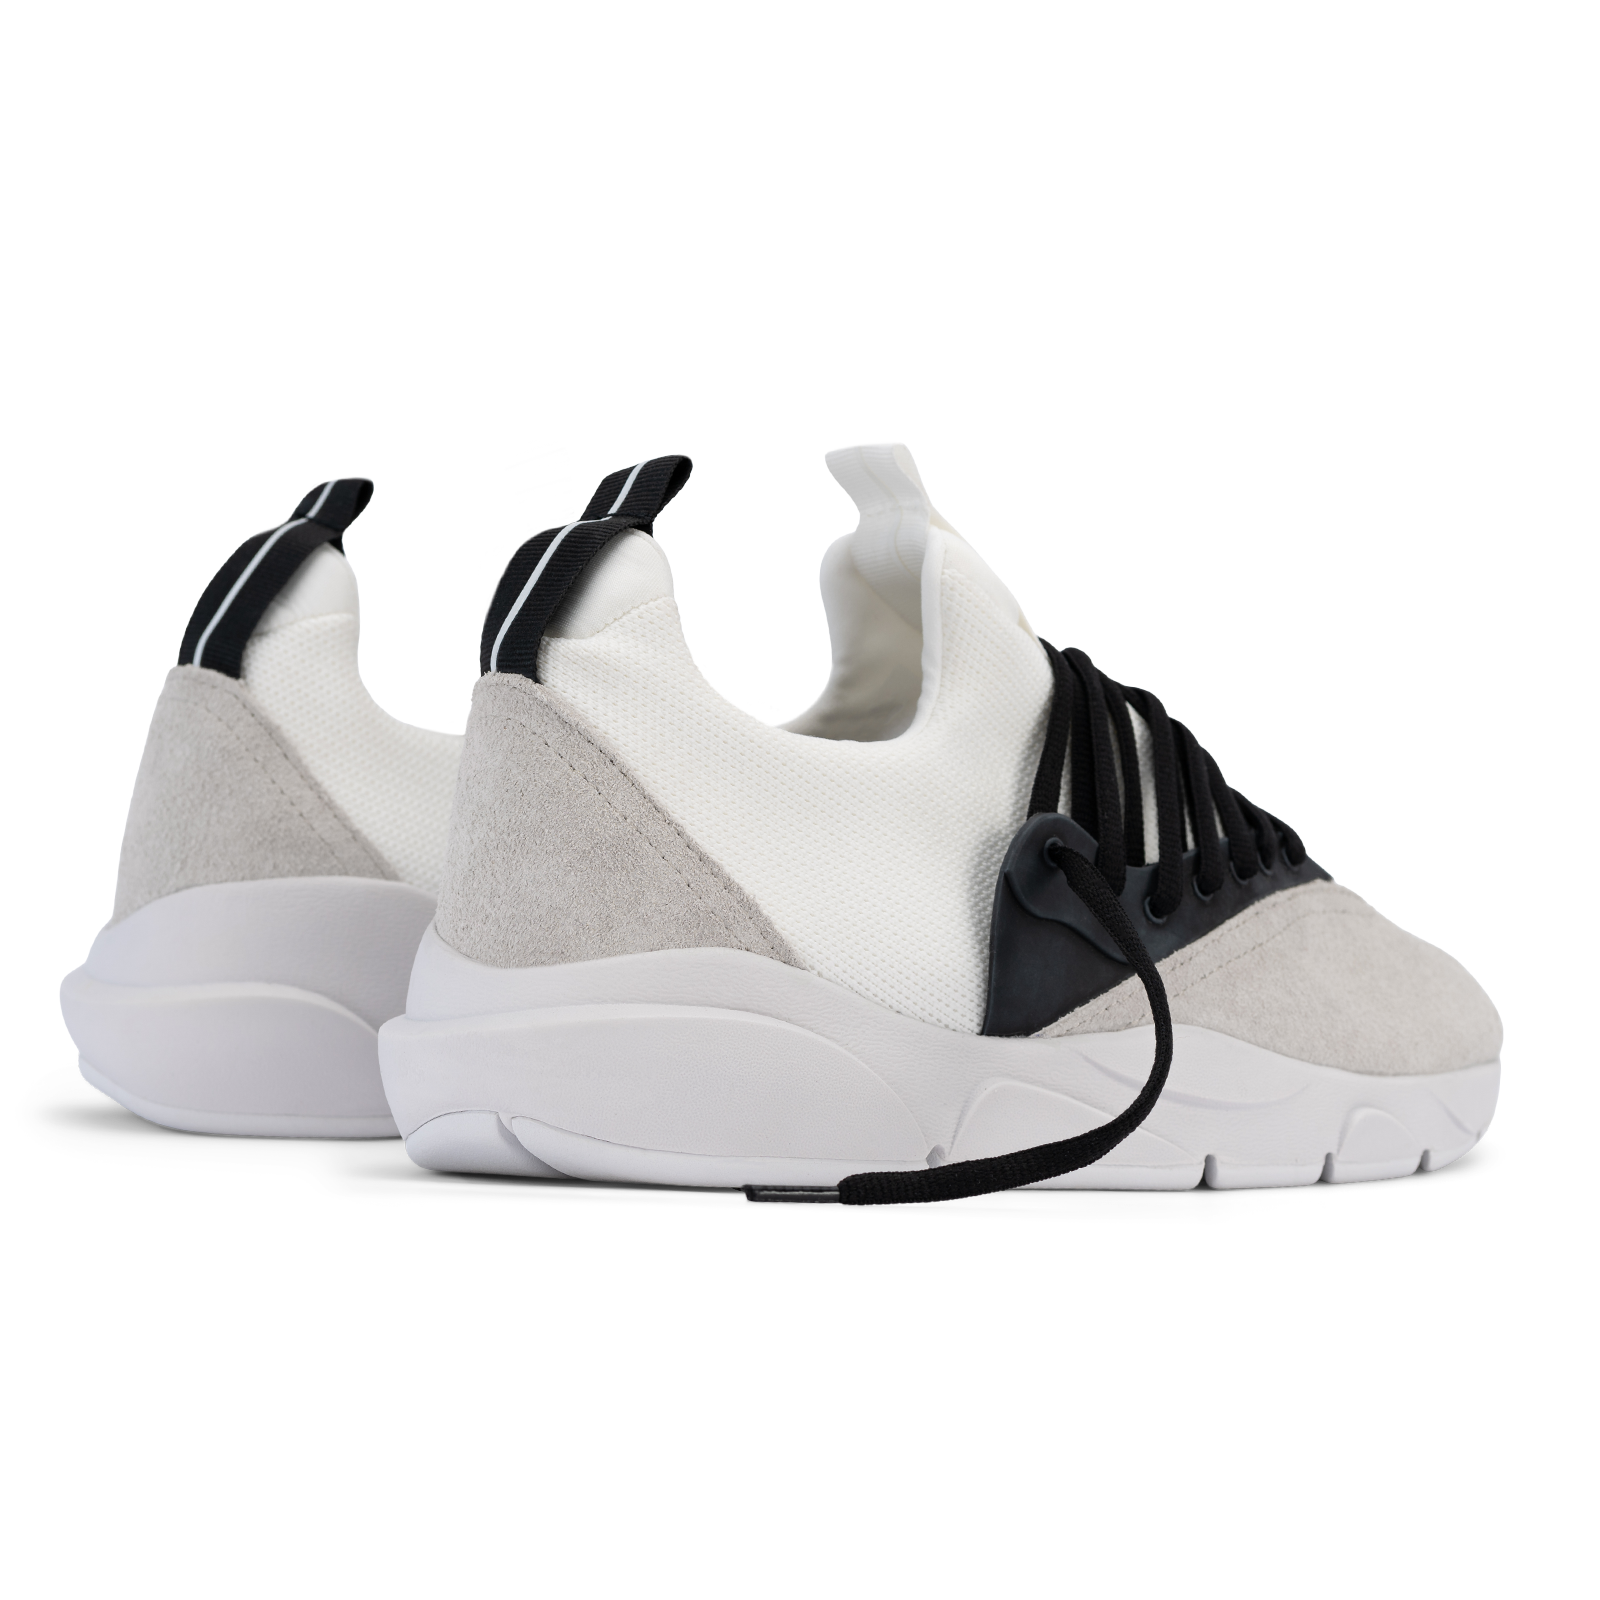 Back 3/4 view, Cloudstryk Fairbanks is a runner with White suede overlays white stretch mesh underlays, Black heel pull molded lace holder, white eva midsol and white rubber outsole.